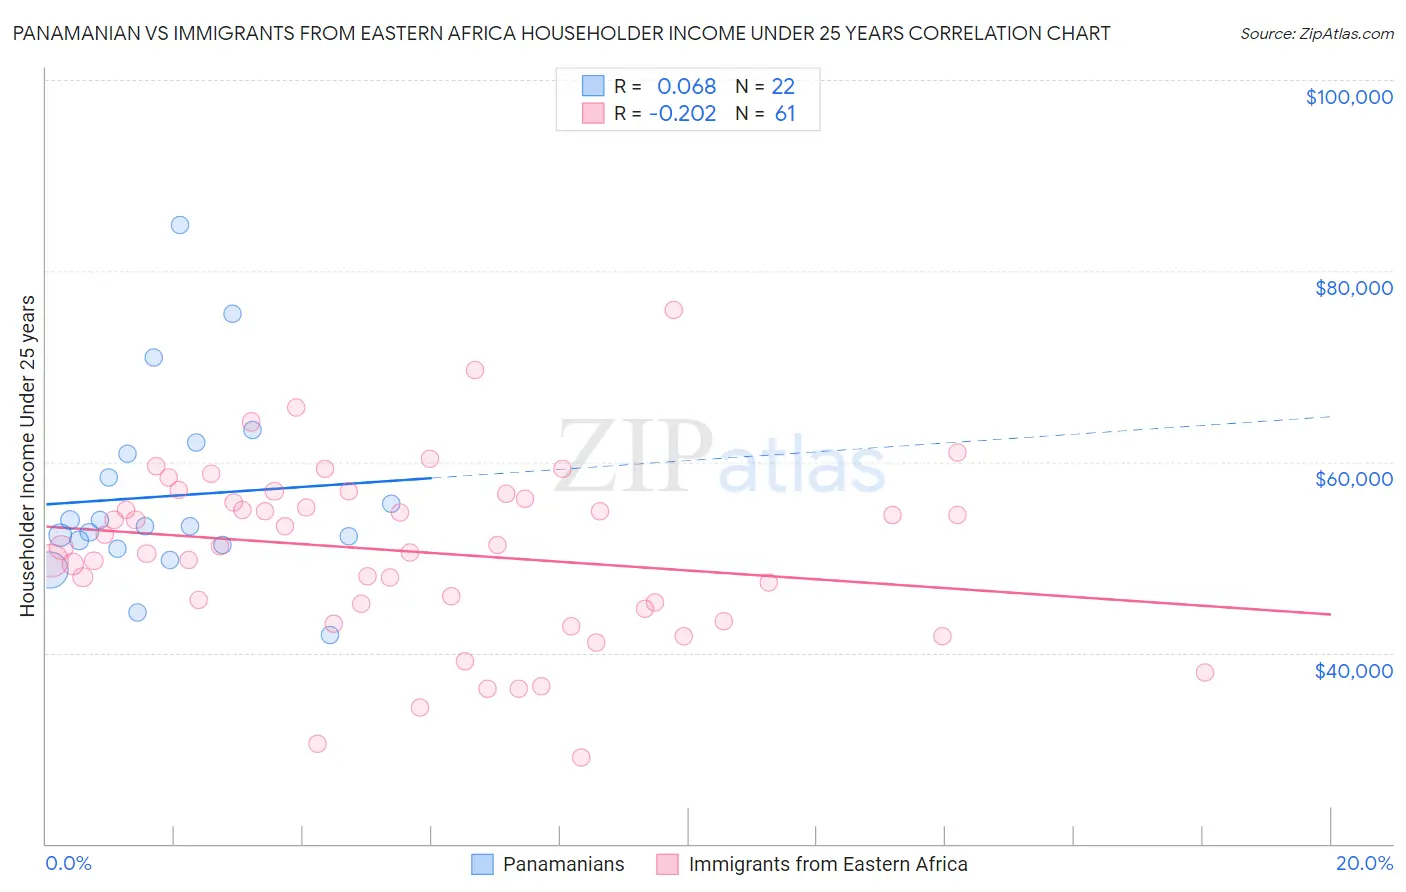 Panamanian vs Immigrants from Eastern Africa Householder Income Under 25 years